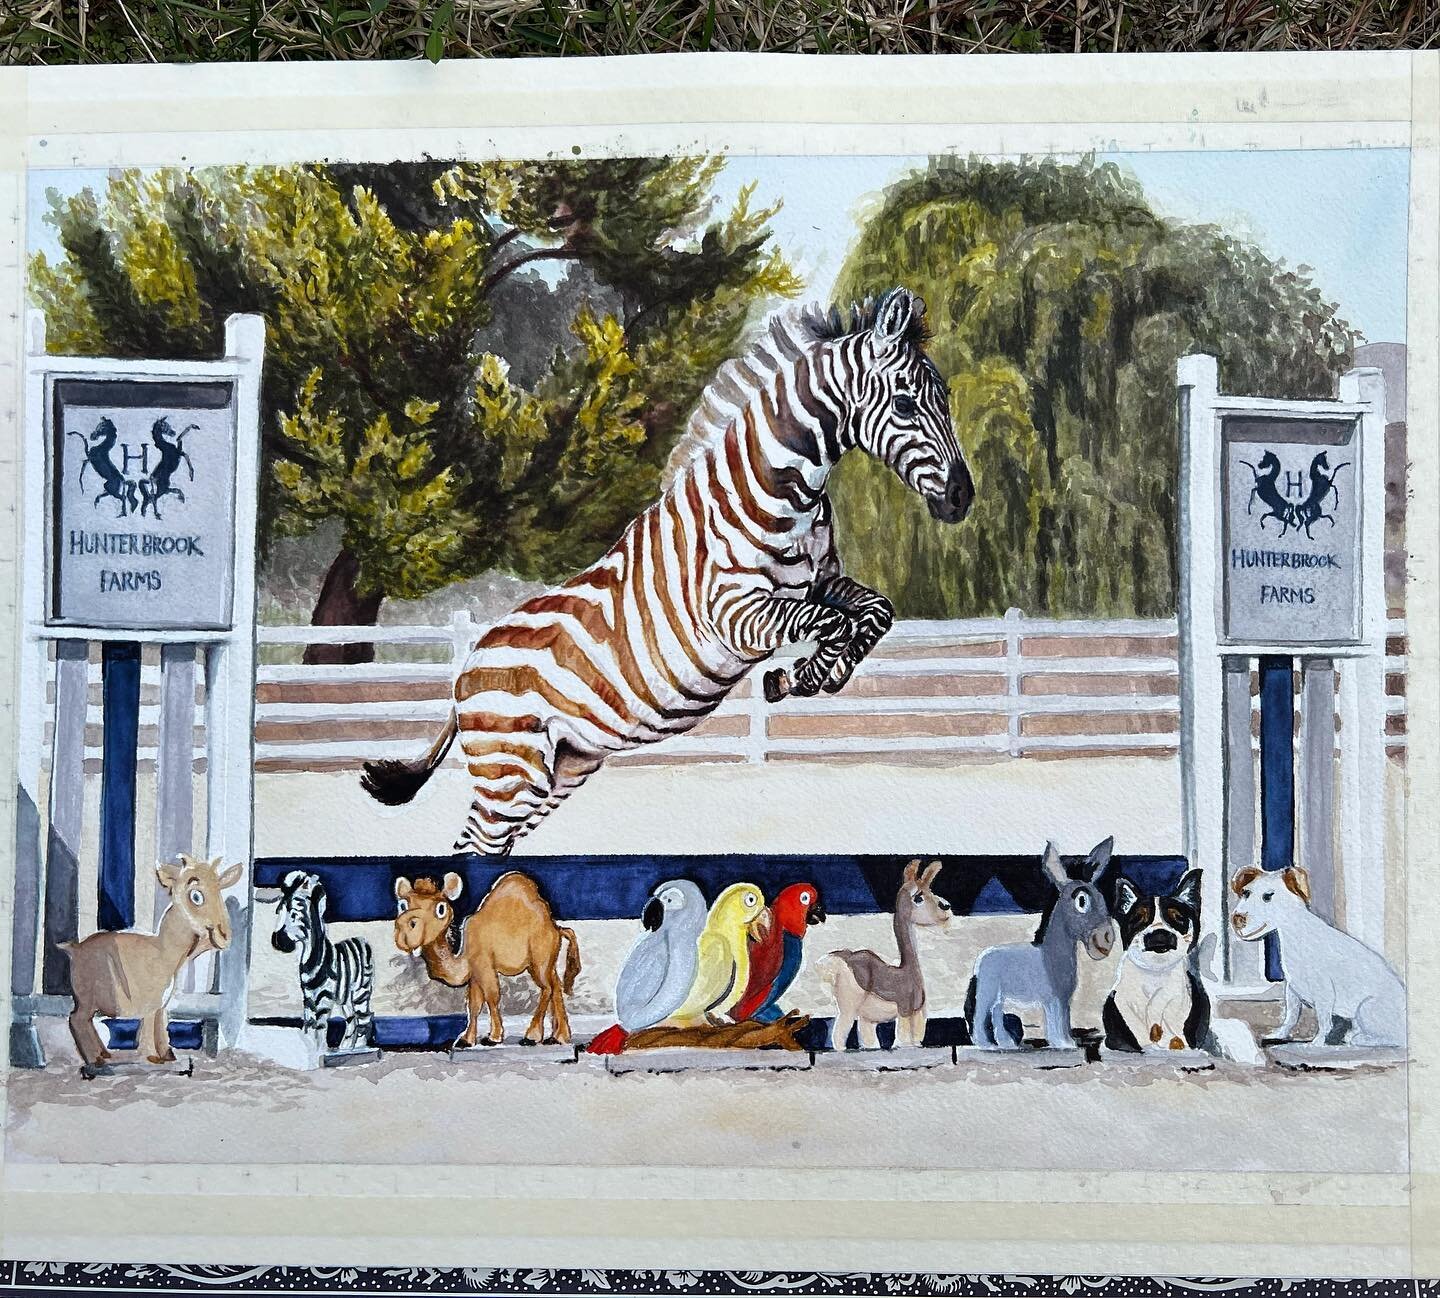 This was by far the most fun holiday commission I have done yet! @ryan_may94 proposed the idea of surprising @nick_haness with a painting of their rescue zebra &ldquo;Joe Exotic&rdquo; jumping one of their @hunterbrook_farms jumps. The jump fillers a